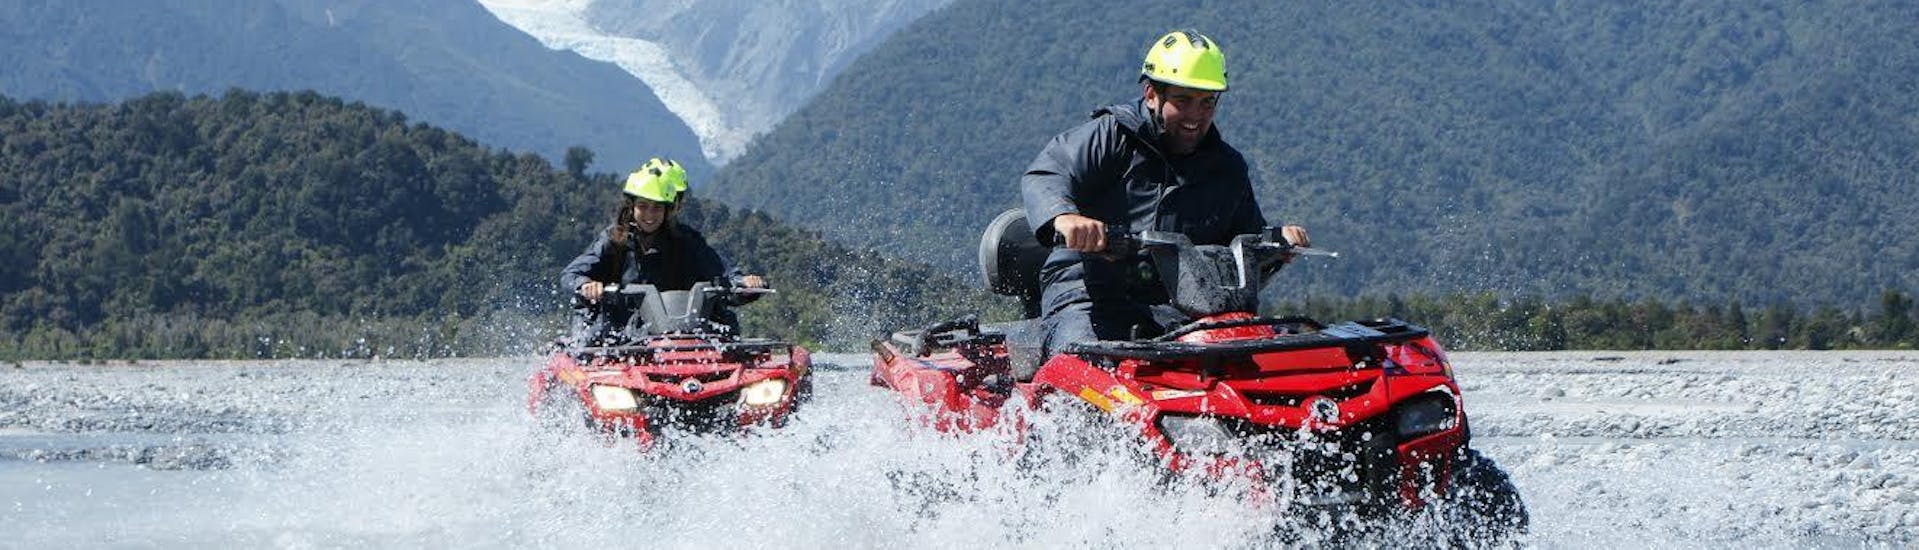 Our guests braving the water trails on their quad bikes with the beautiful Franz Josef Glacier and typically beautiful kiwi mountains in the background. 